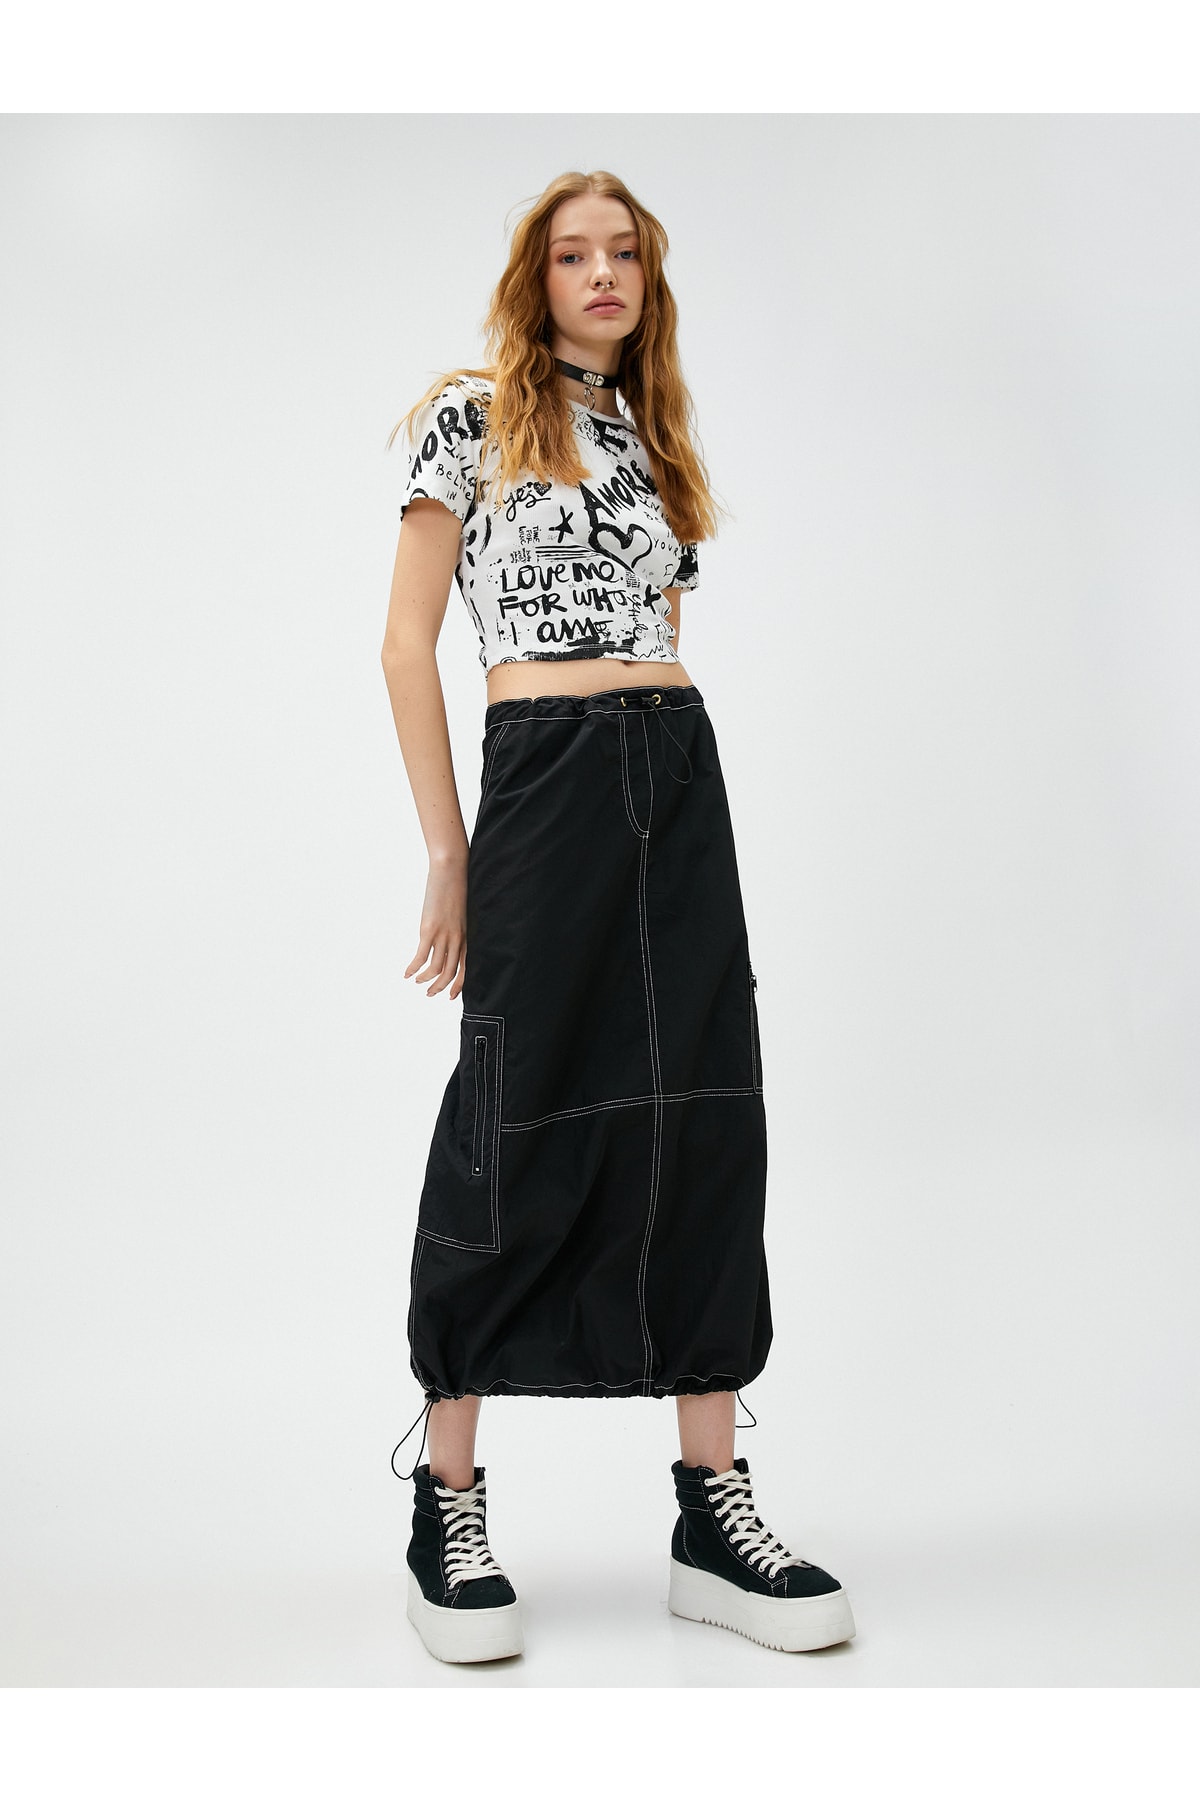 Koton Parachute Skirt Midi With Pocket Stitching Detail Zippered With Stopper.